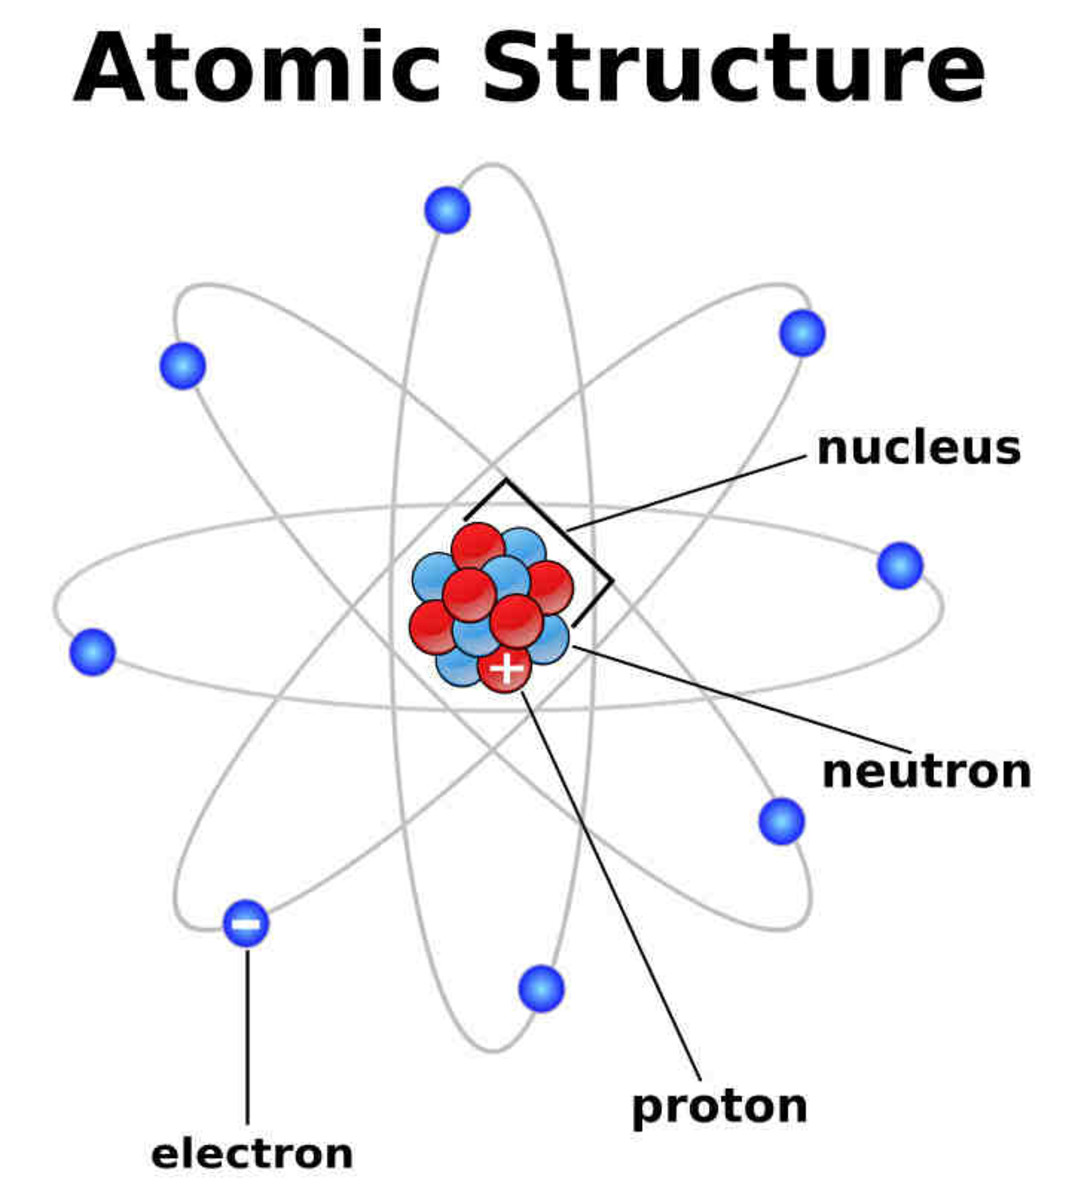 All matter is made up of minute, discreet, indivisible, and indestructible particles called atoms.